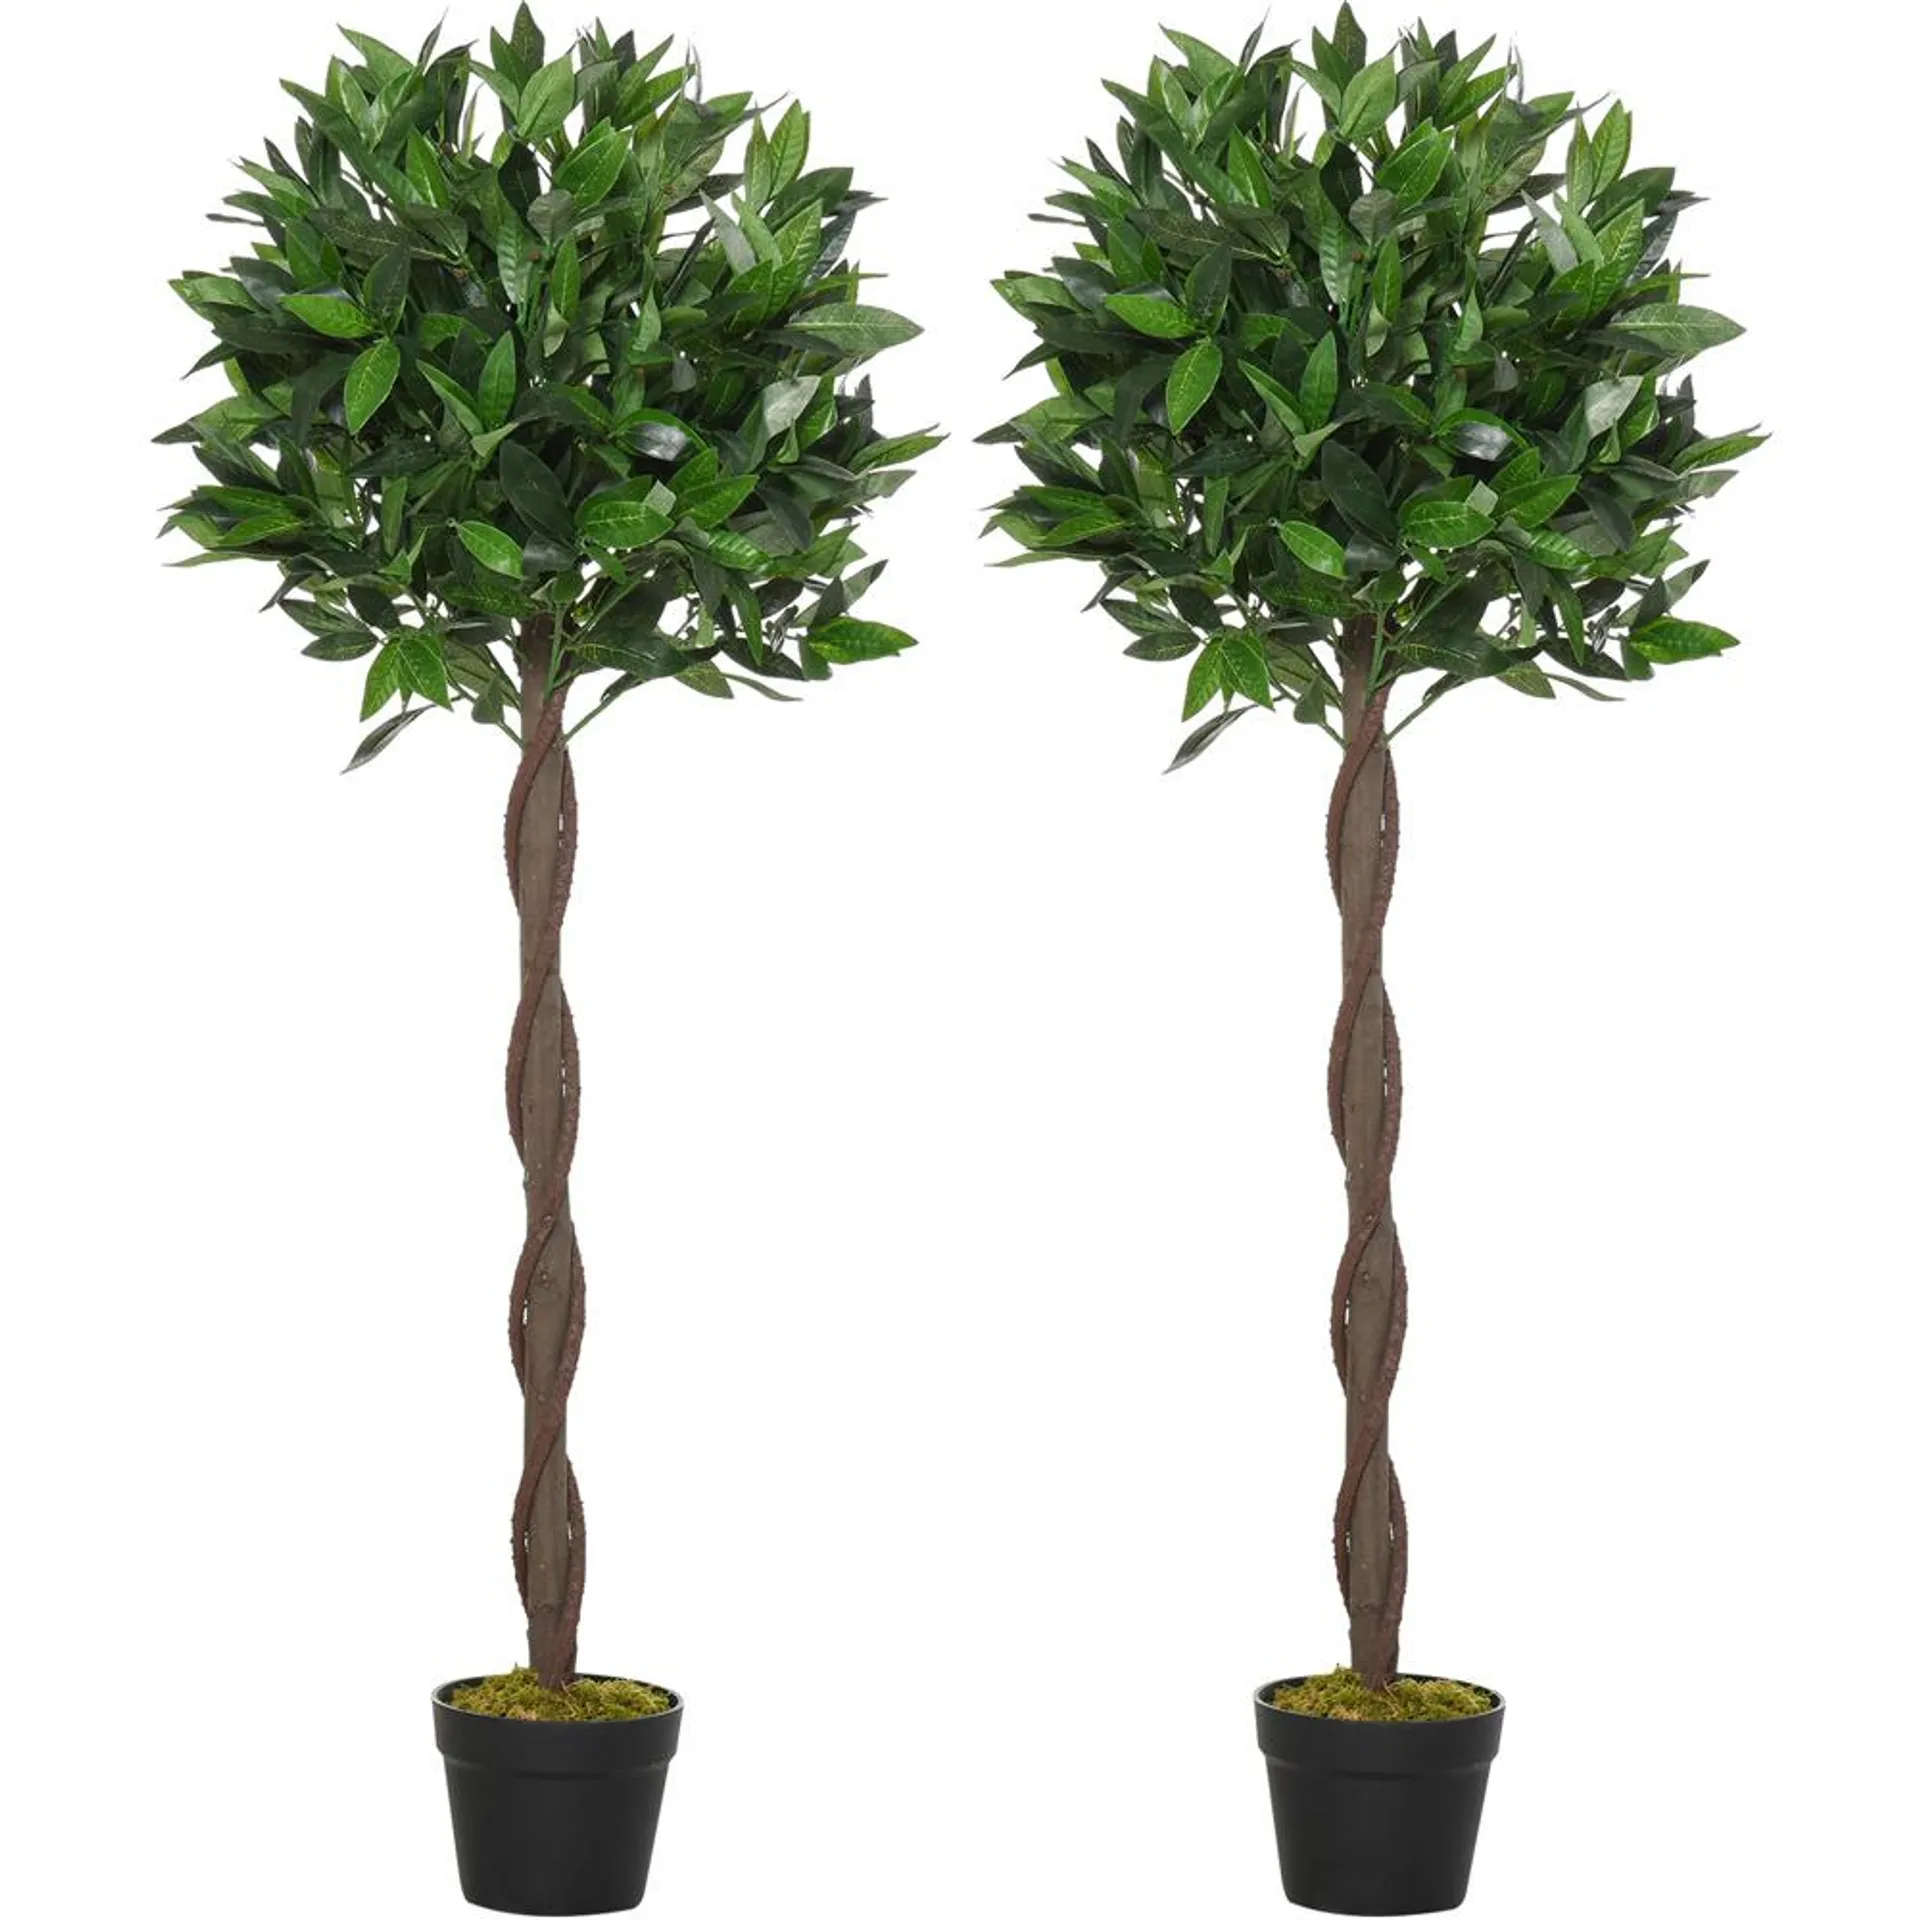 Outsunny Bay Leaf Laurel Ball Tree Artificial Plant In Pot 4ft 2 Pack